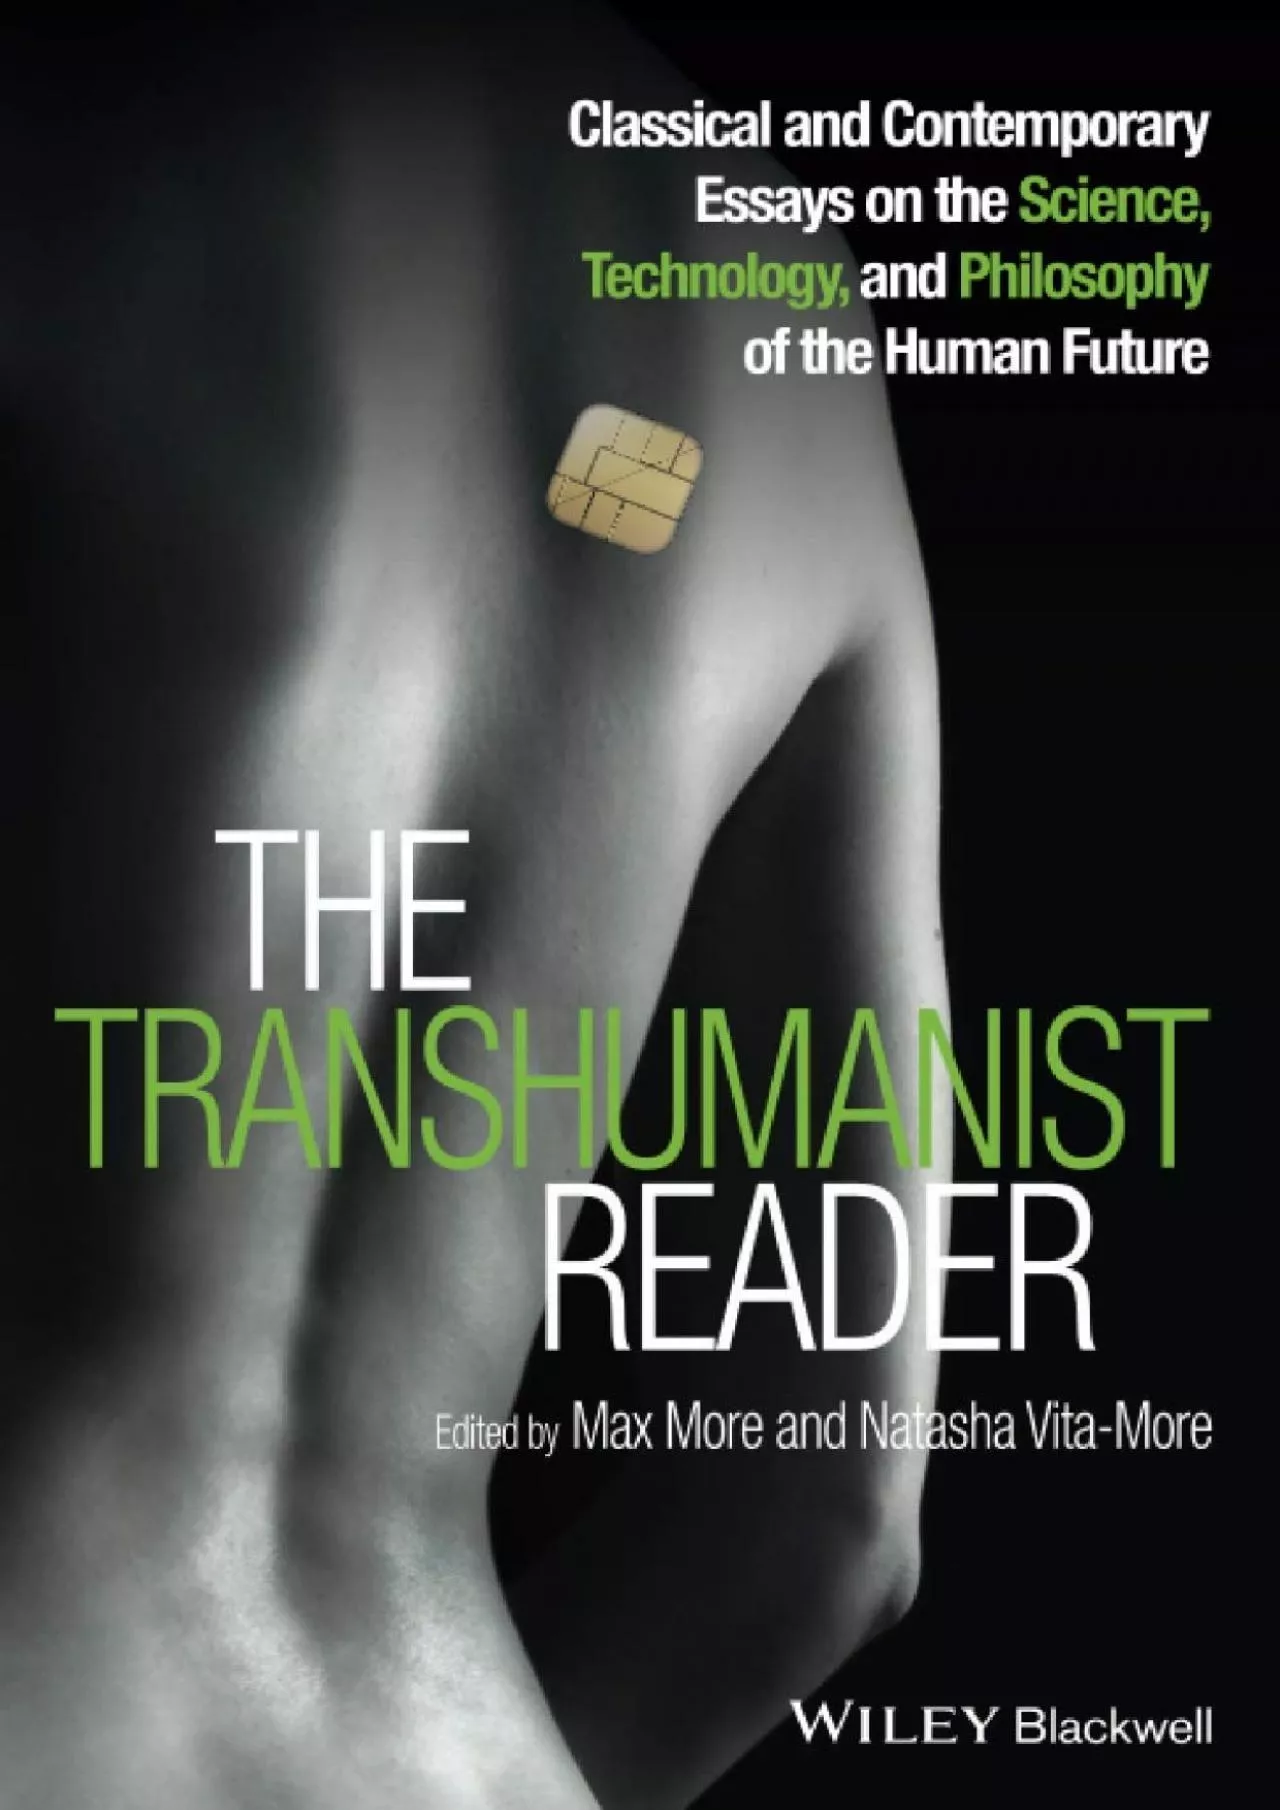 (EBOOK)-The Transhumanist Reader: Classical and Contemporary Essays on the Science, Technology,